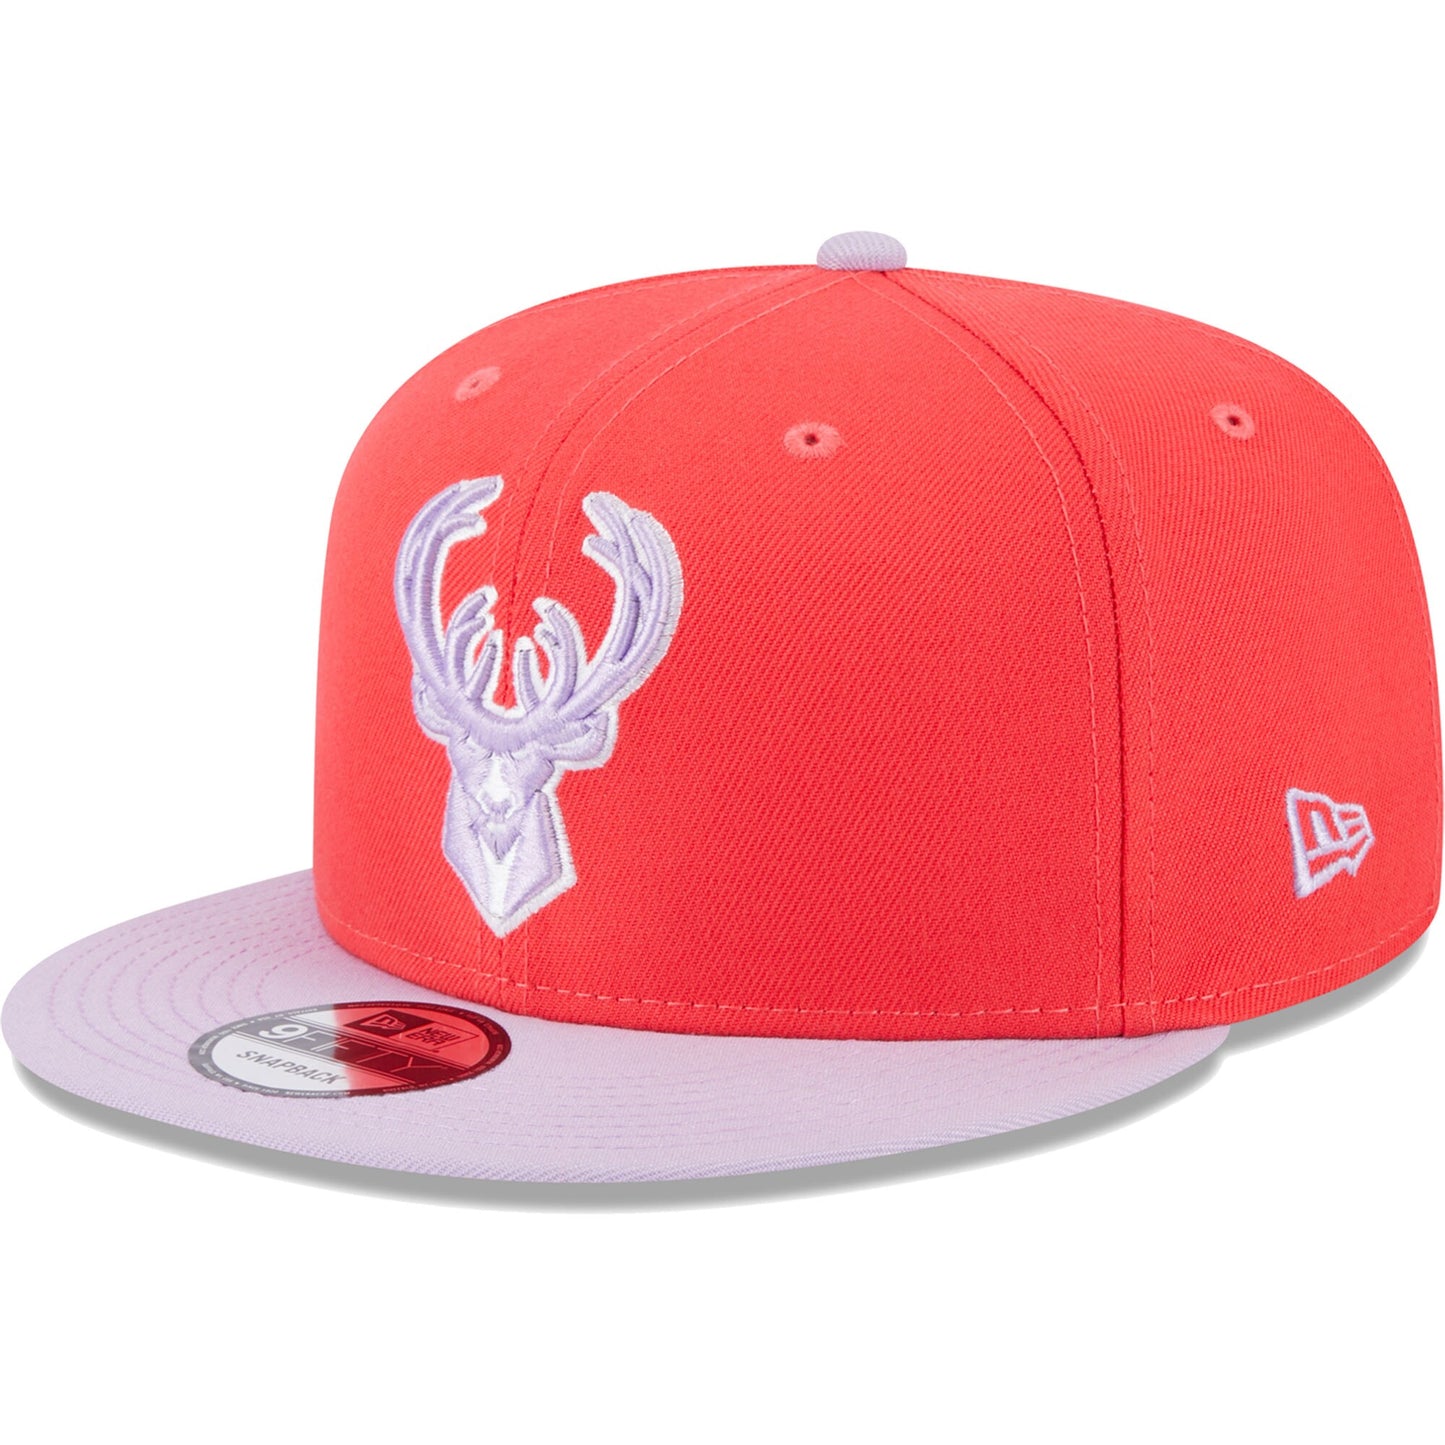 Milwaukee Bucks New Era 2-Tone Color Pack 9FIFTY Snapback Hat - Red/Lavender